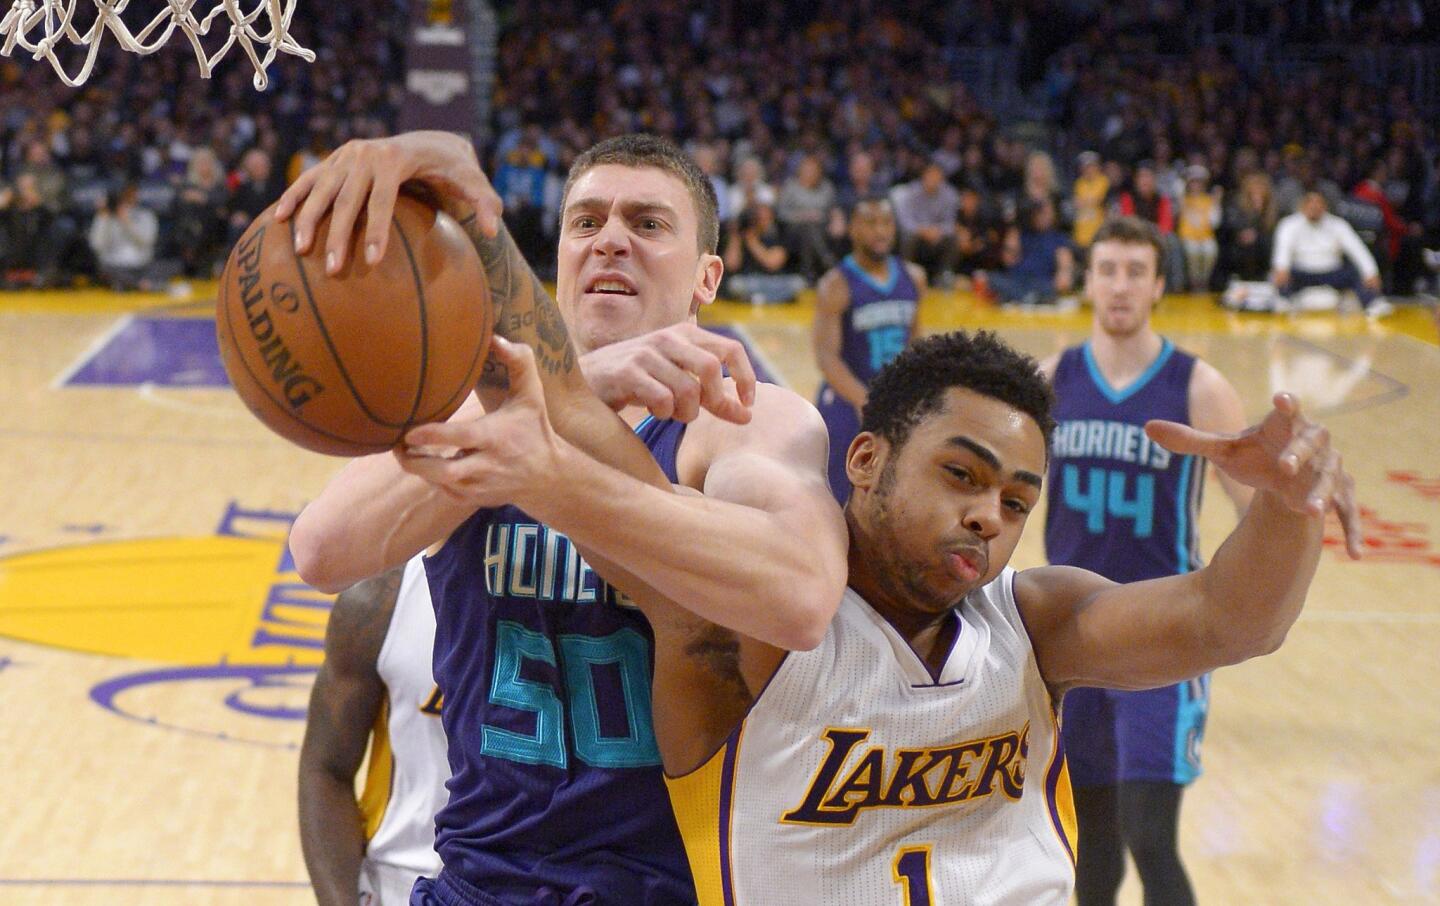 Lakers keep putting the 'L' in L.A., losing their 10th in a row to tie franchise record